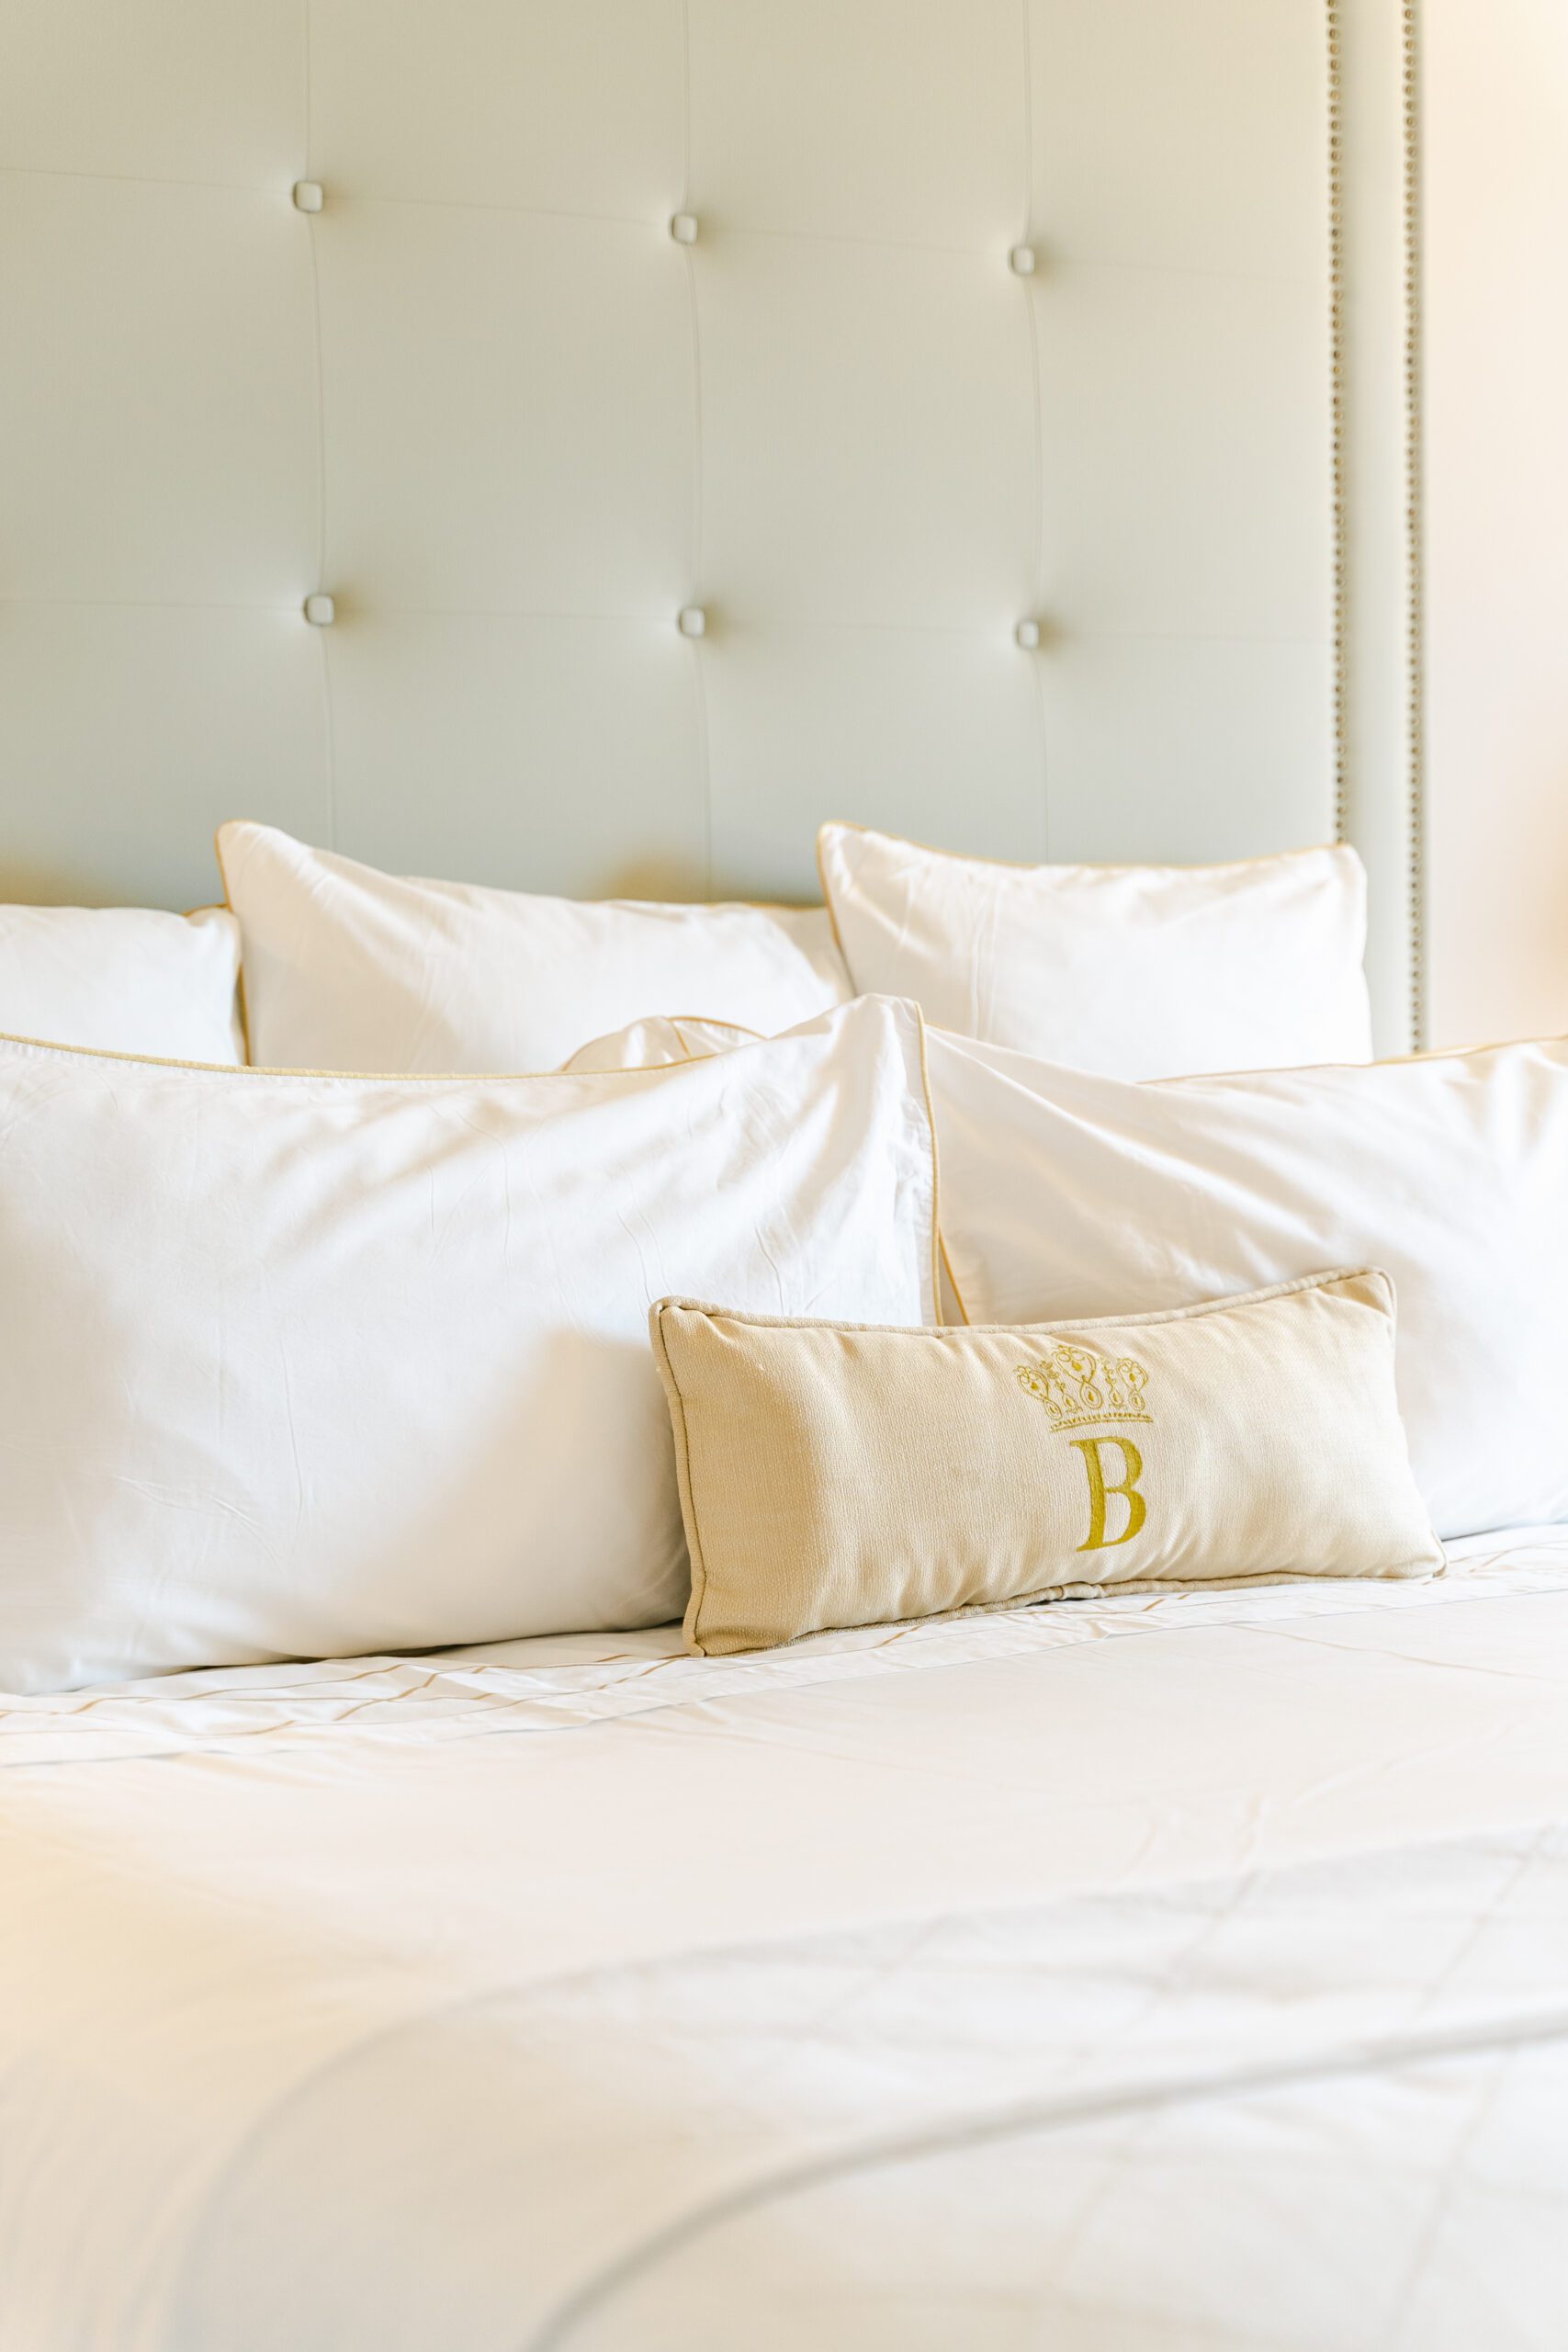 luxury hotel bed with monogrammed pillows